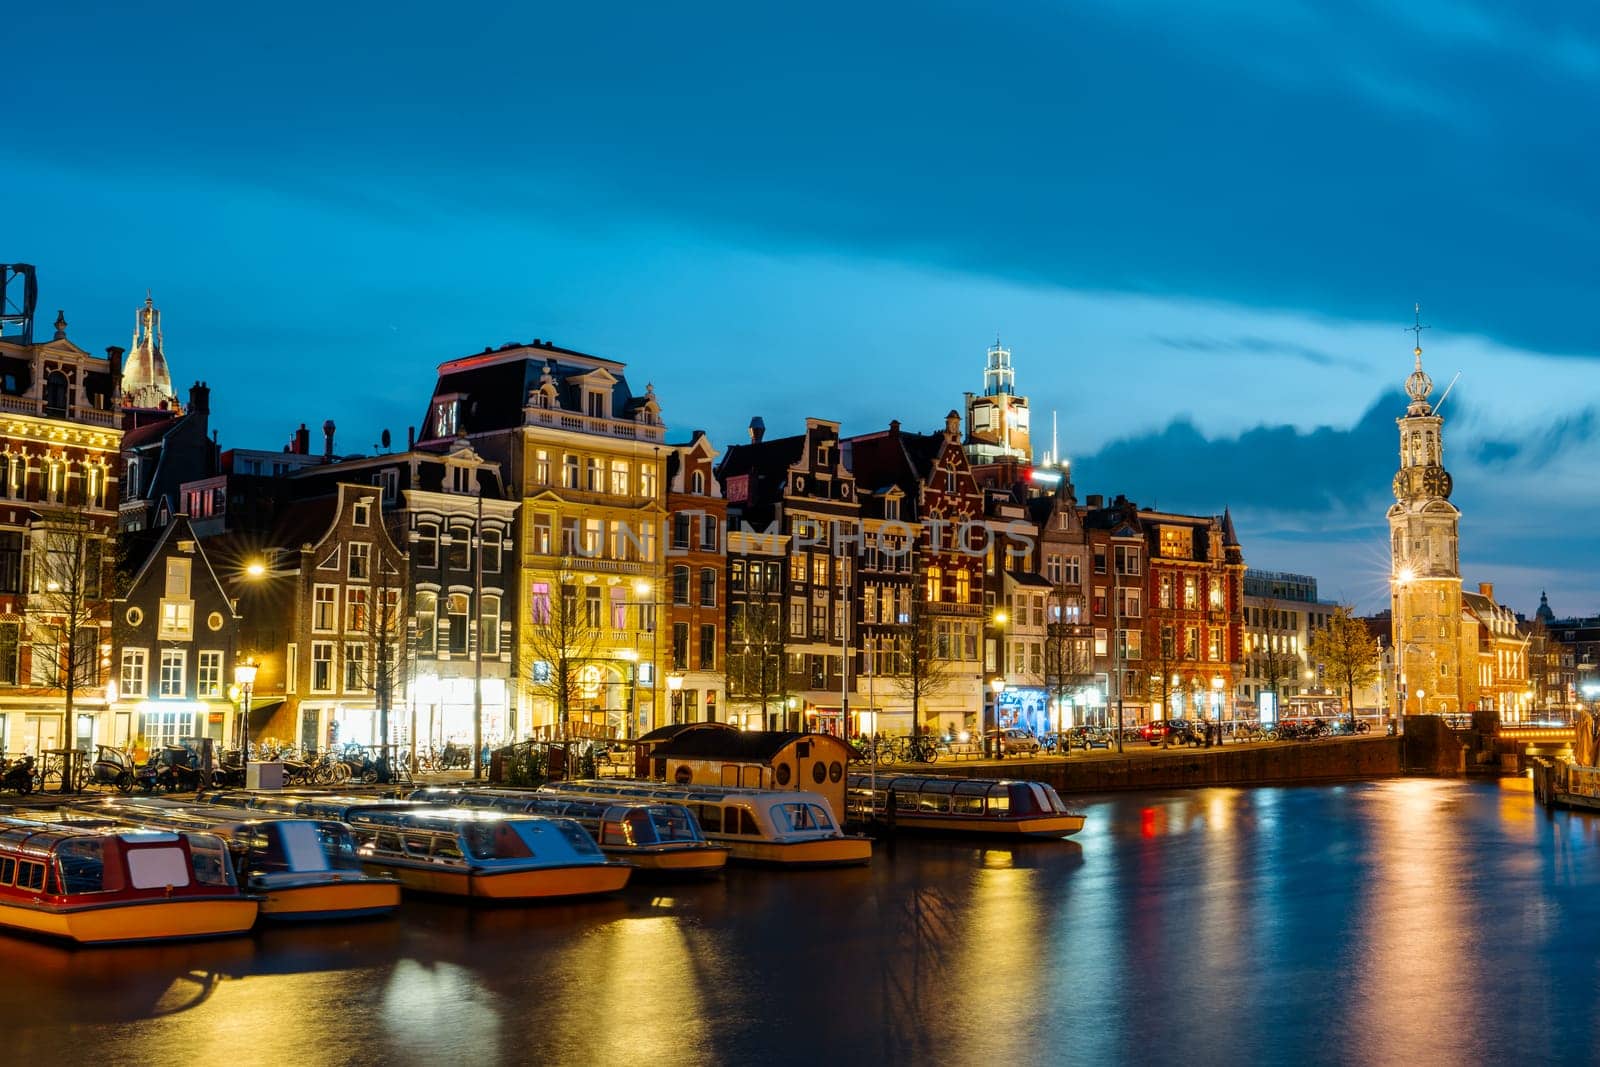 Captivating Night in Amsterdam: A Mesmerizing Long Exposure Photo of Amsterdam's Nighttime Canals by PhotoTime